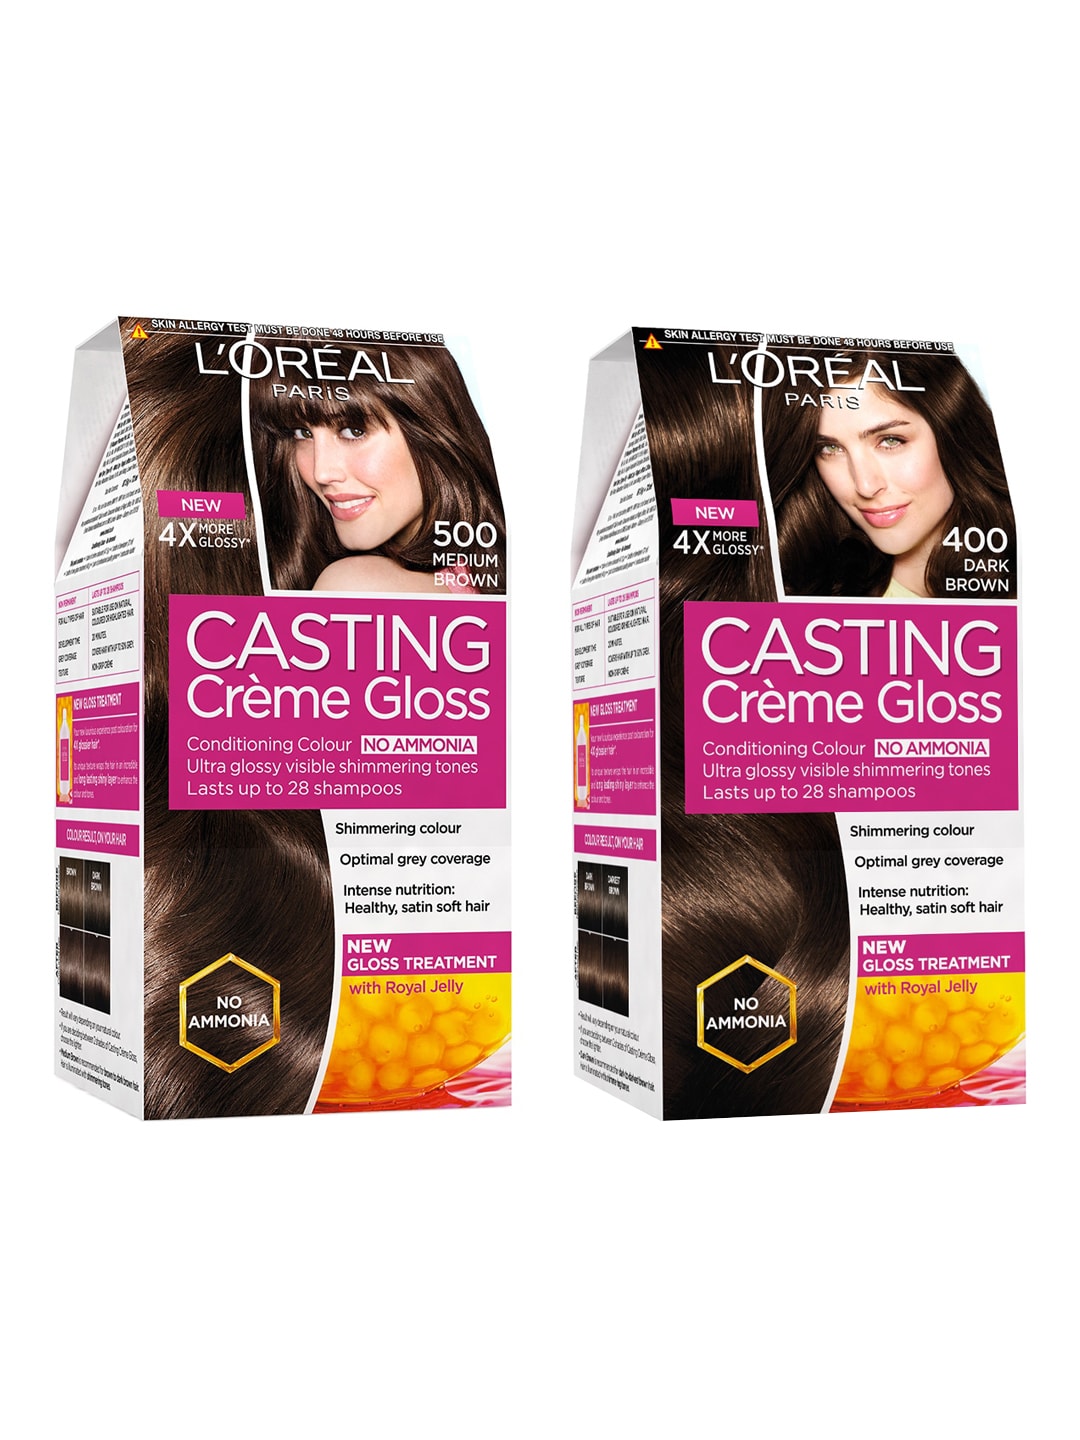 LOreal Paris Set of 2 Casting Creme Gloss Hair Colour Price in India